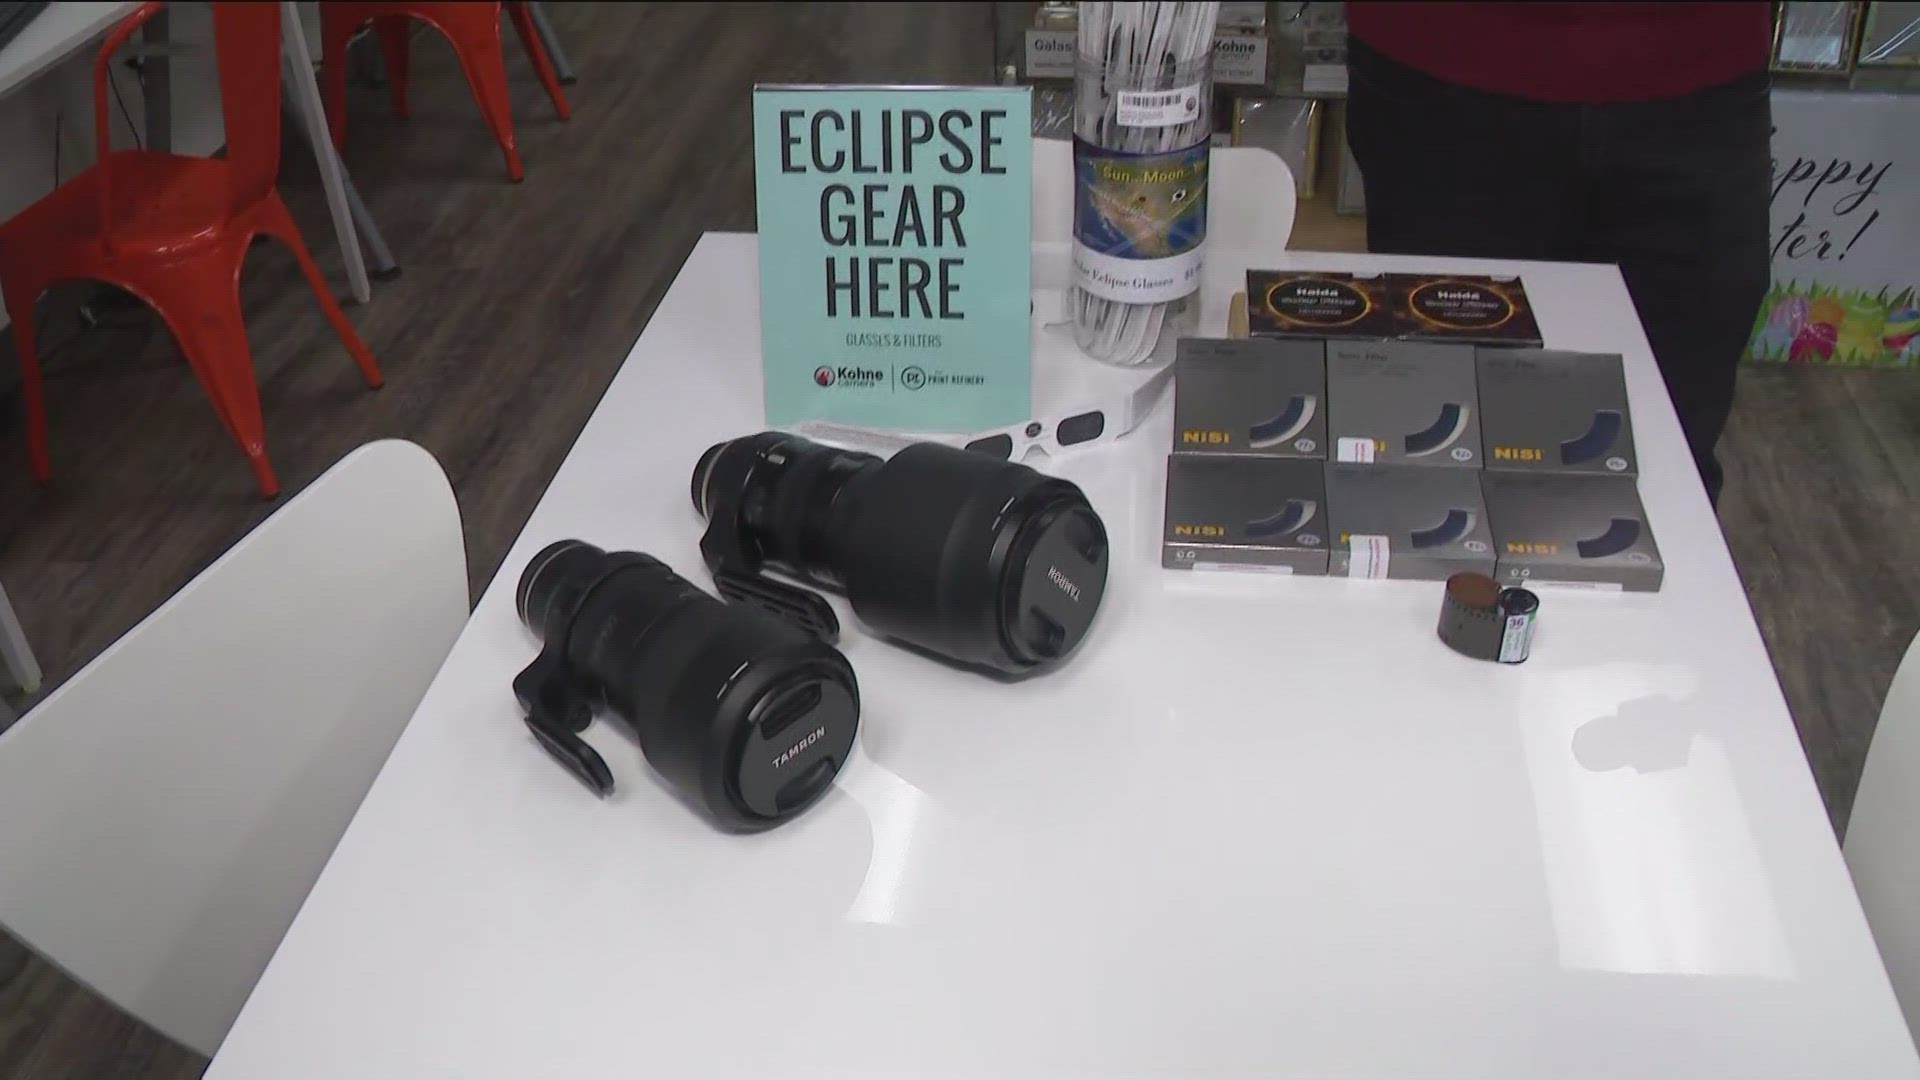 Preston Dibling from Koehne Camera talks with WTOL 11's Kaylee Bowers about ways you can keep your lens safe when photographing the solar eclipse on April 8.